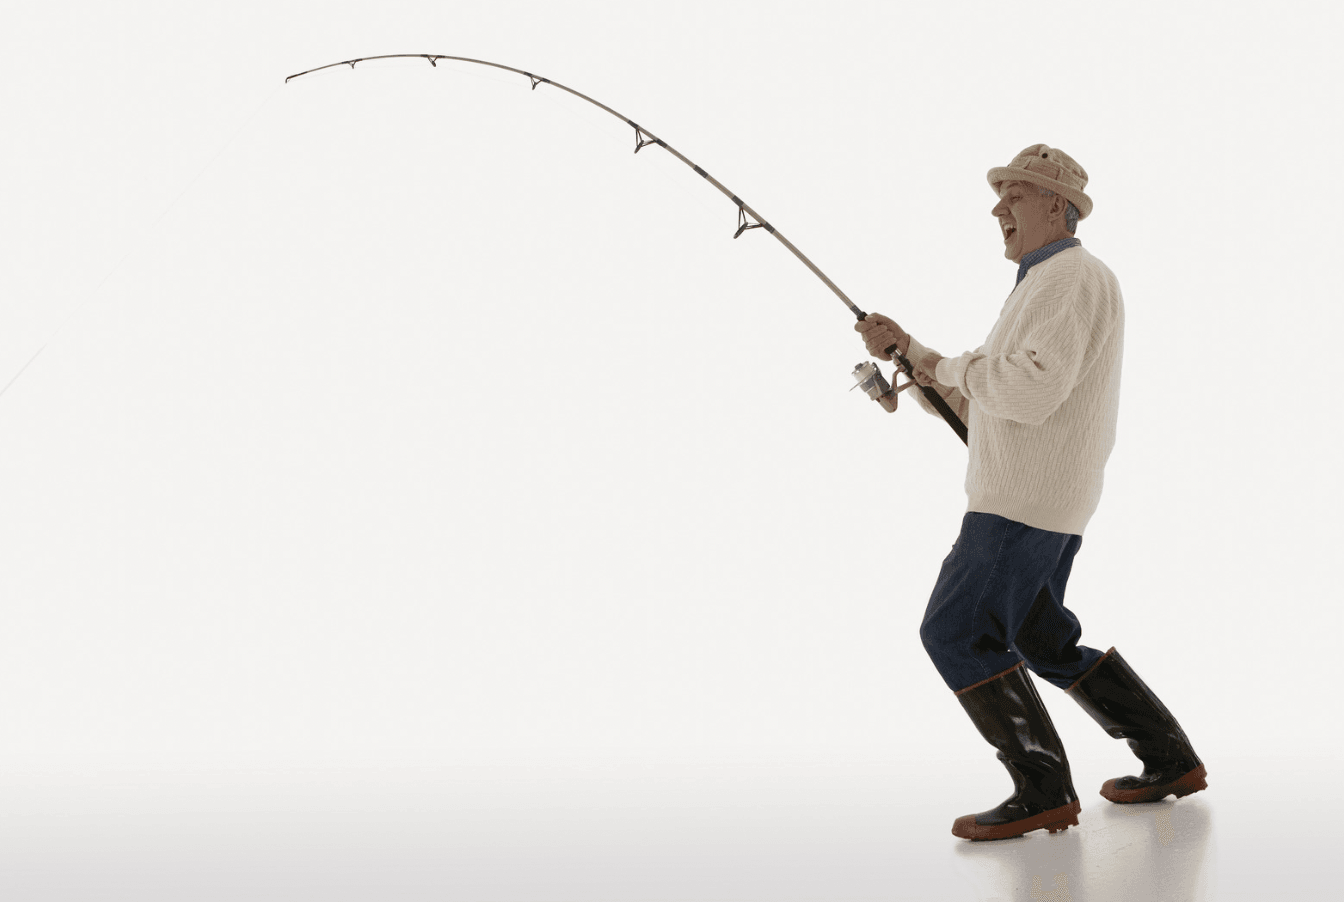  Rods - Fly Fishing: Sports, Fitness & Outdoors